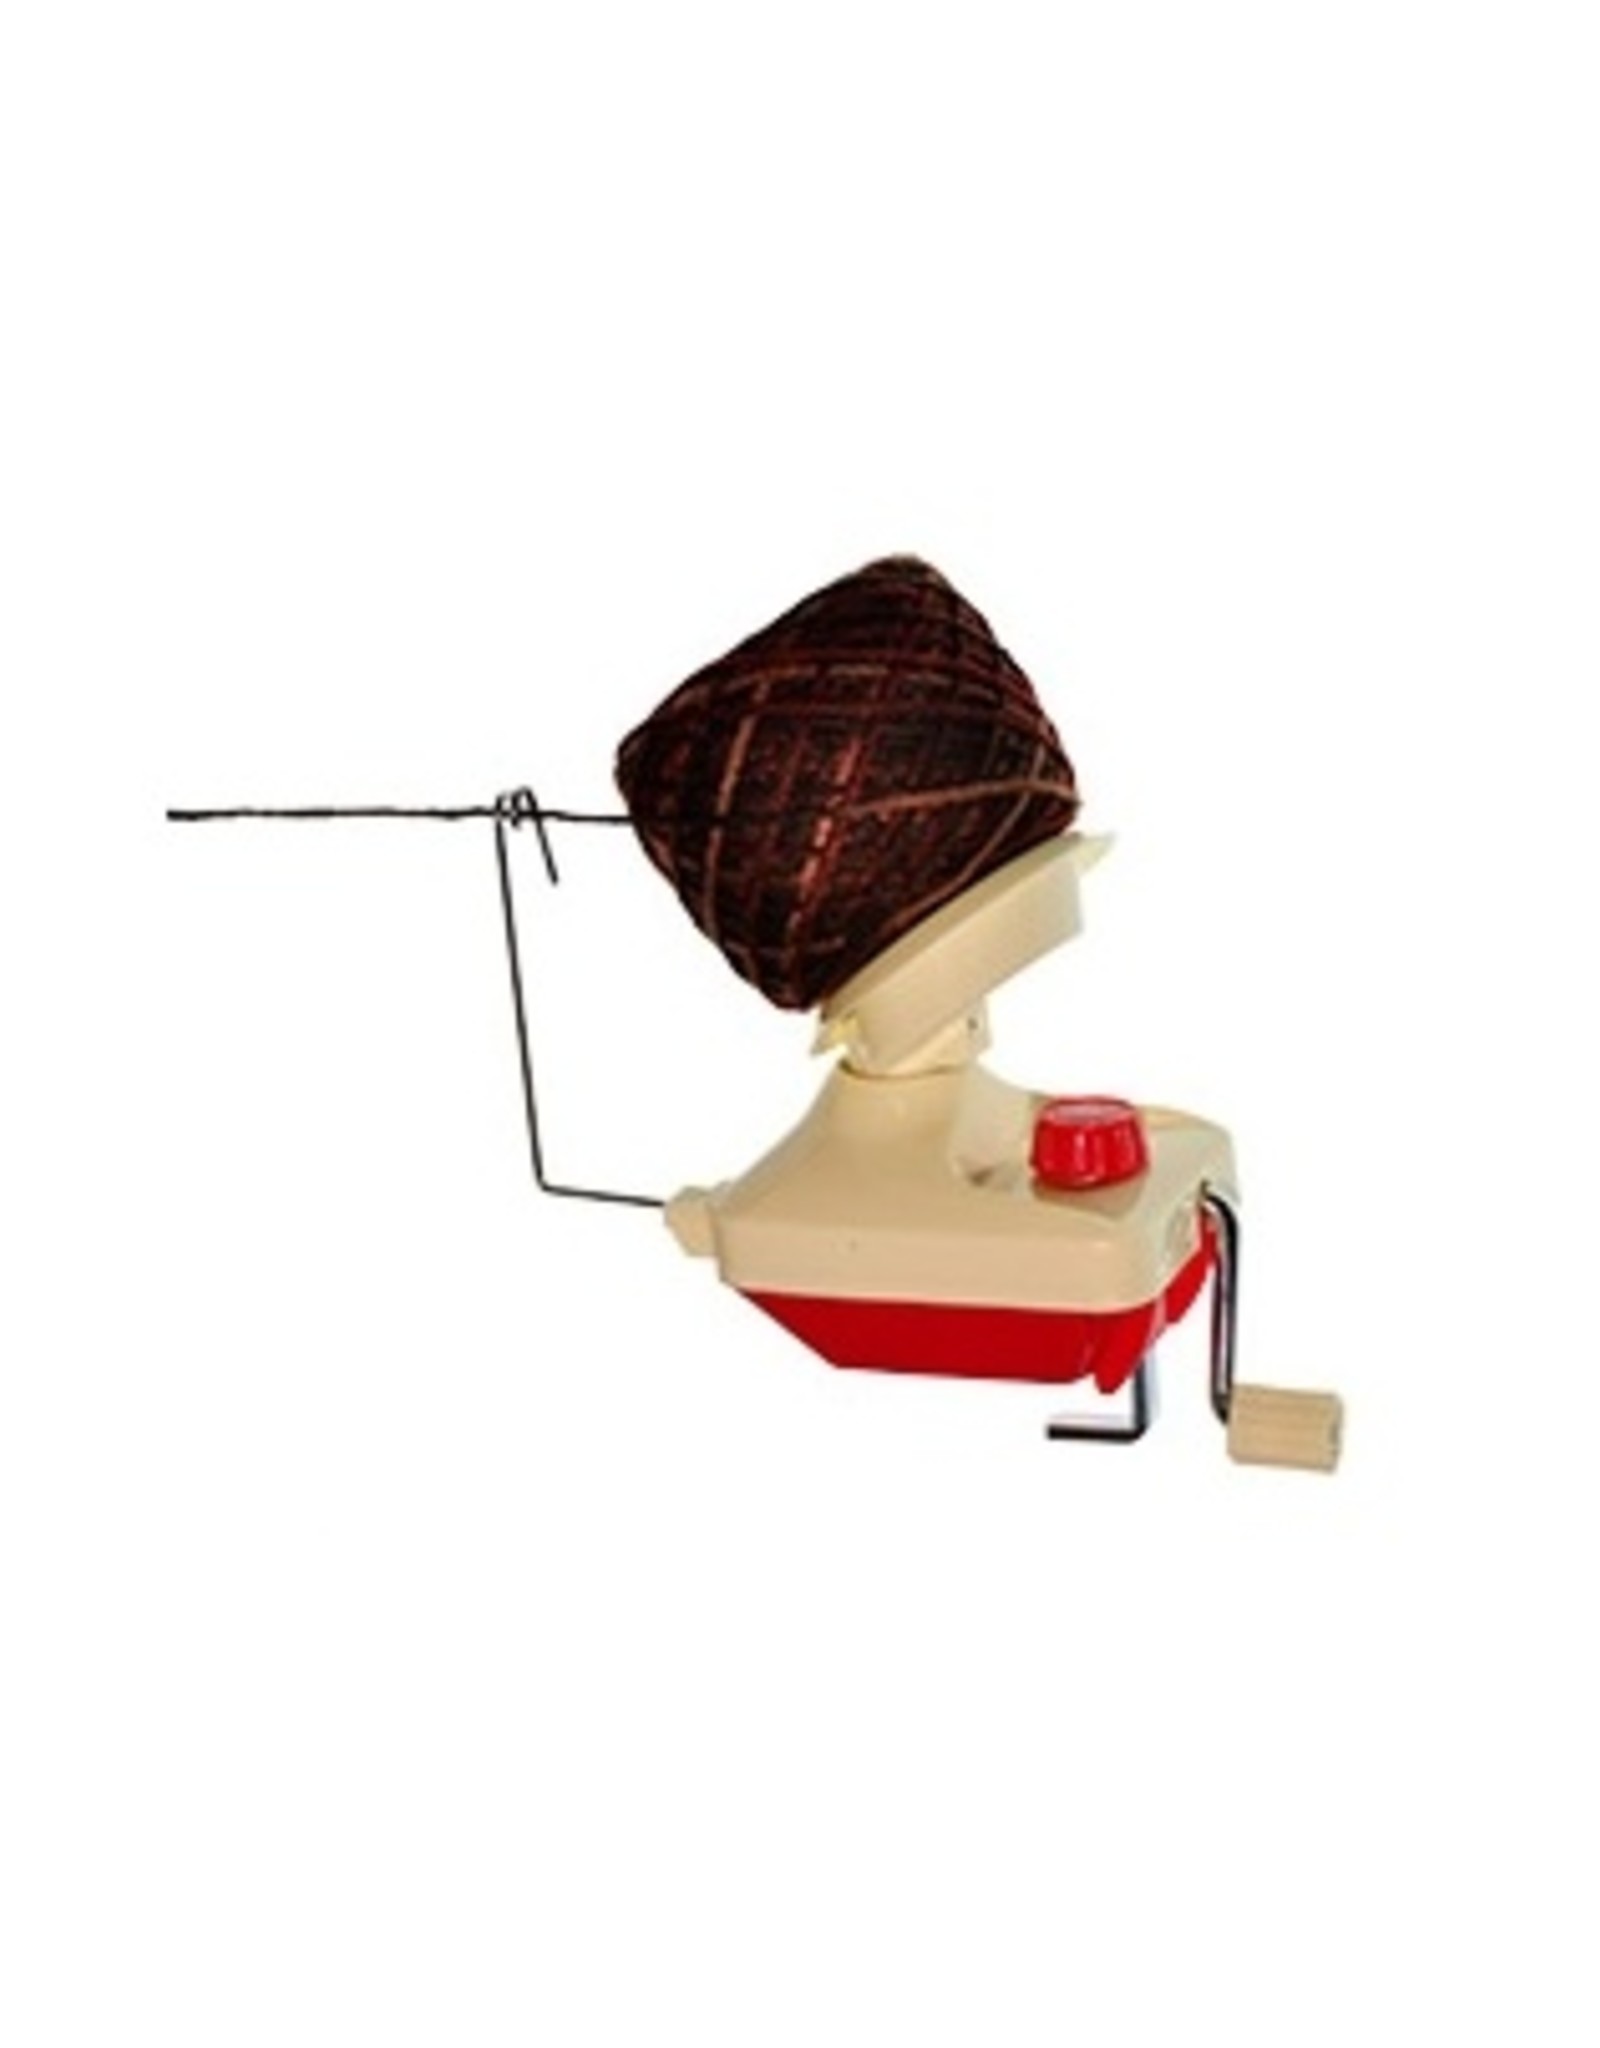 Lacis Lacis Yarn Winder Red